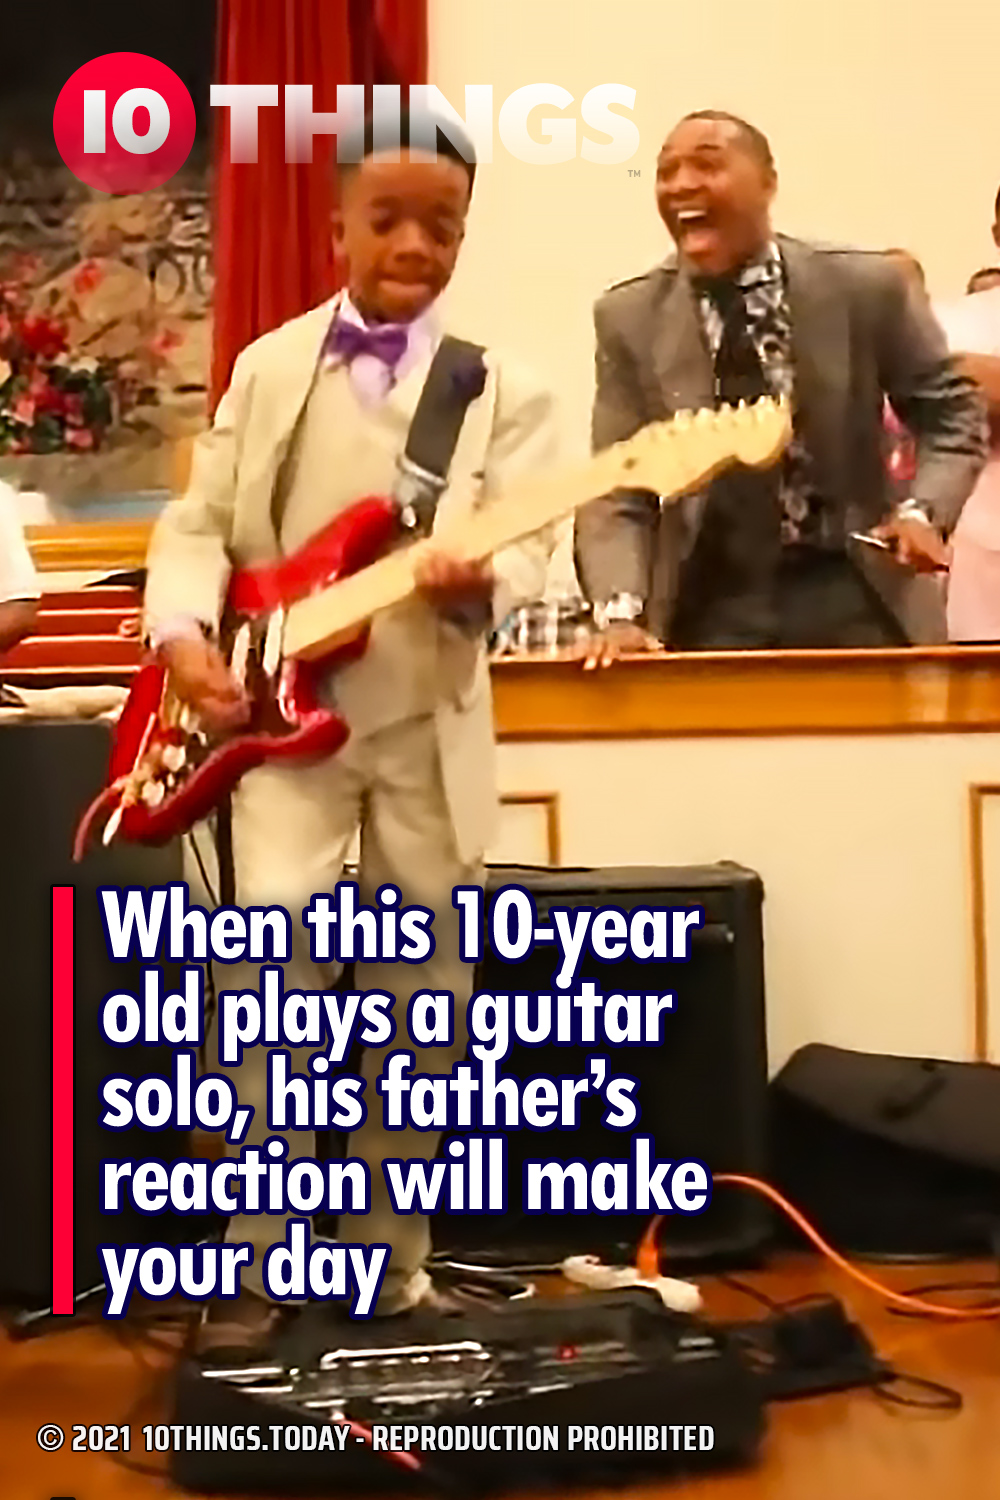 When this 10-year old plays a guitar solo, his father’s reaction will make your day